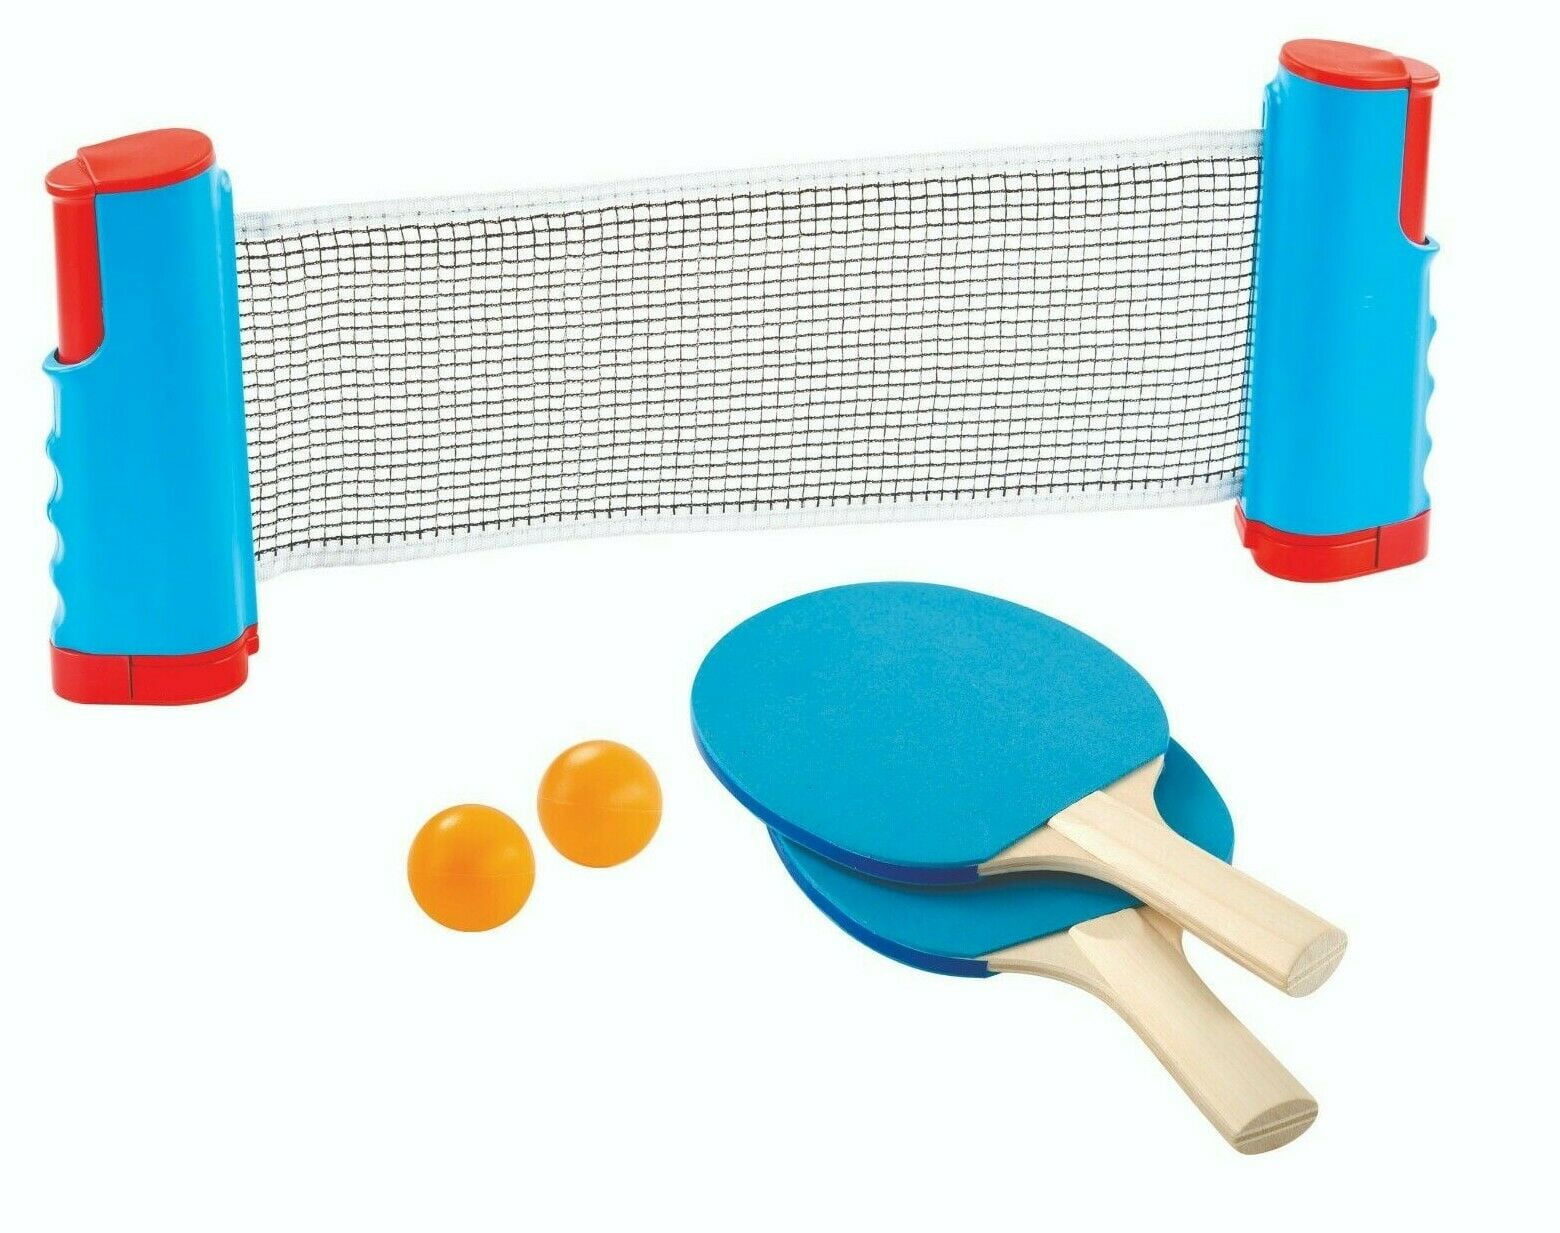 Net Retractable Table Tennis Ping Pong Portable Set Replacement Kit Games Rack 1 